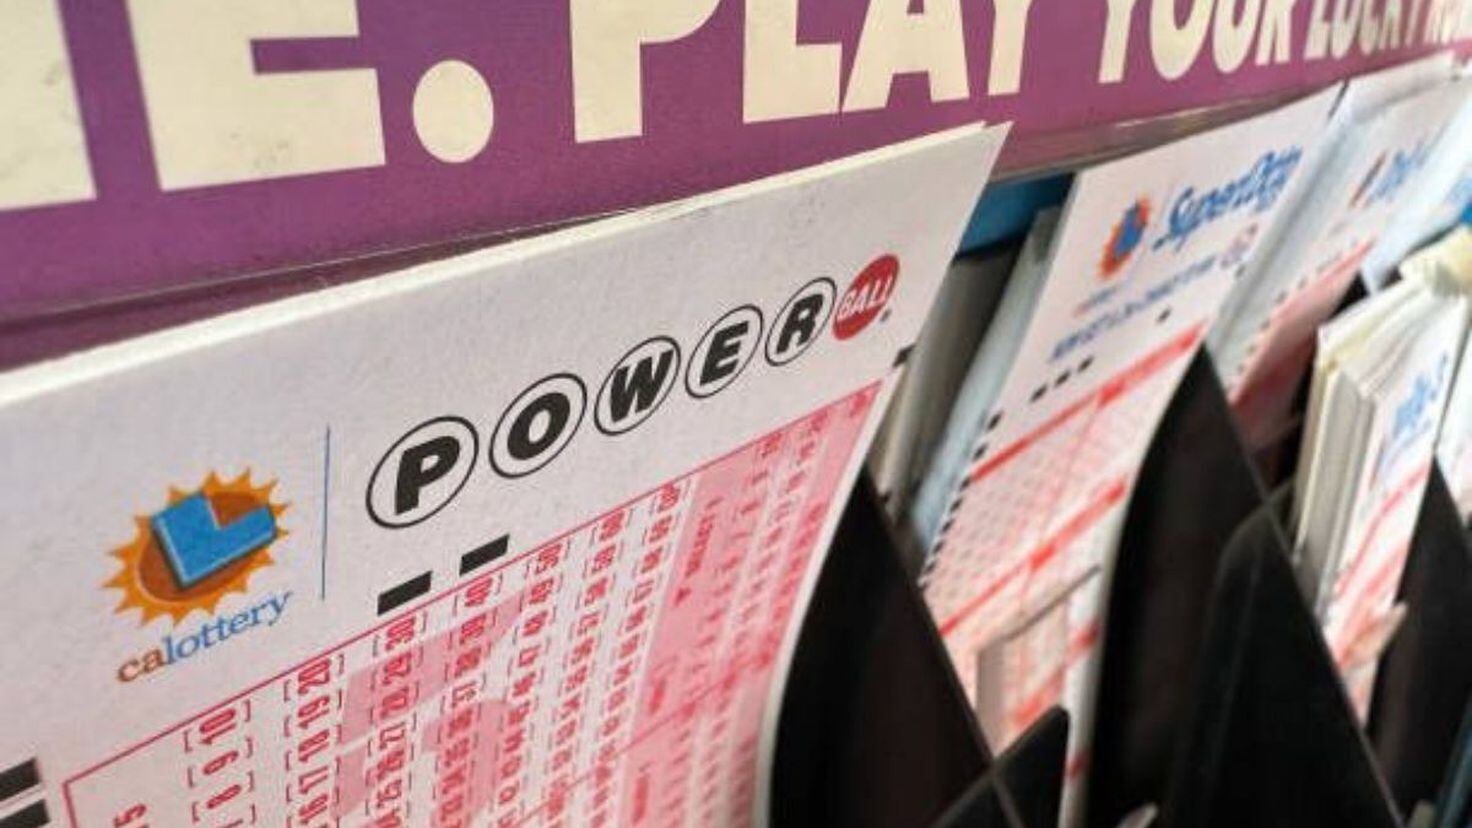 What days are Powerball drawings? AS USA